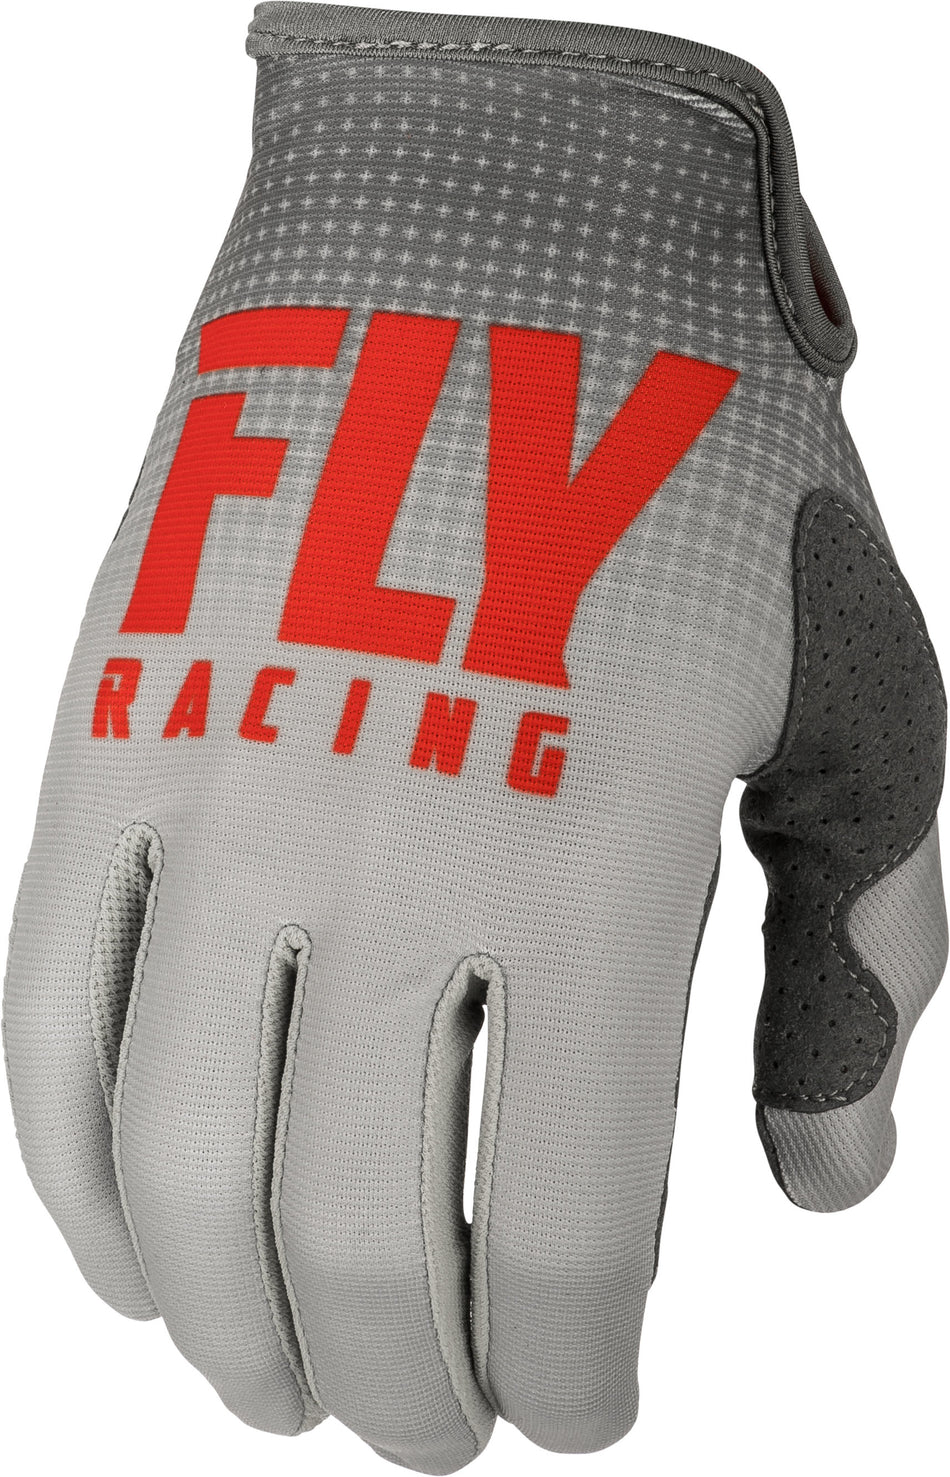 FLY RACING Lite Gloves Red/Grey Sz 08 372-01208